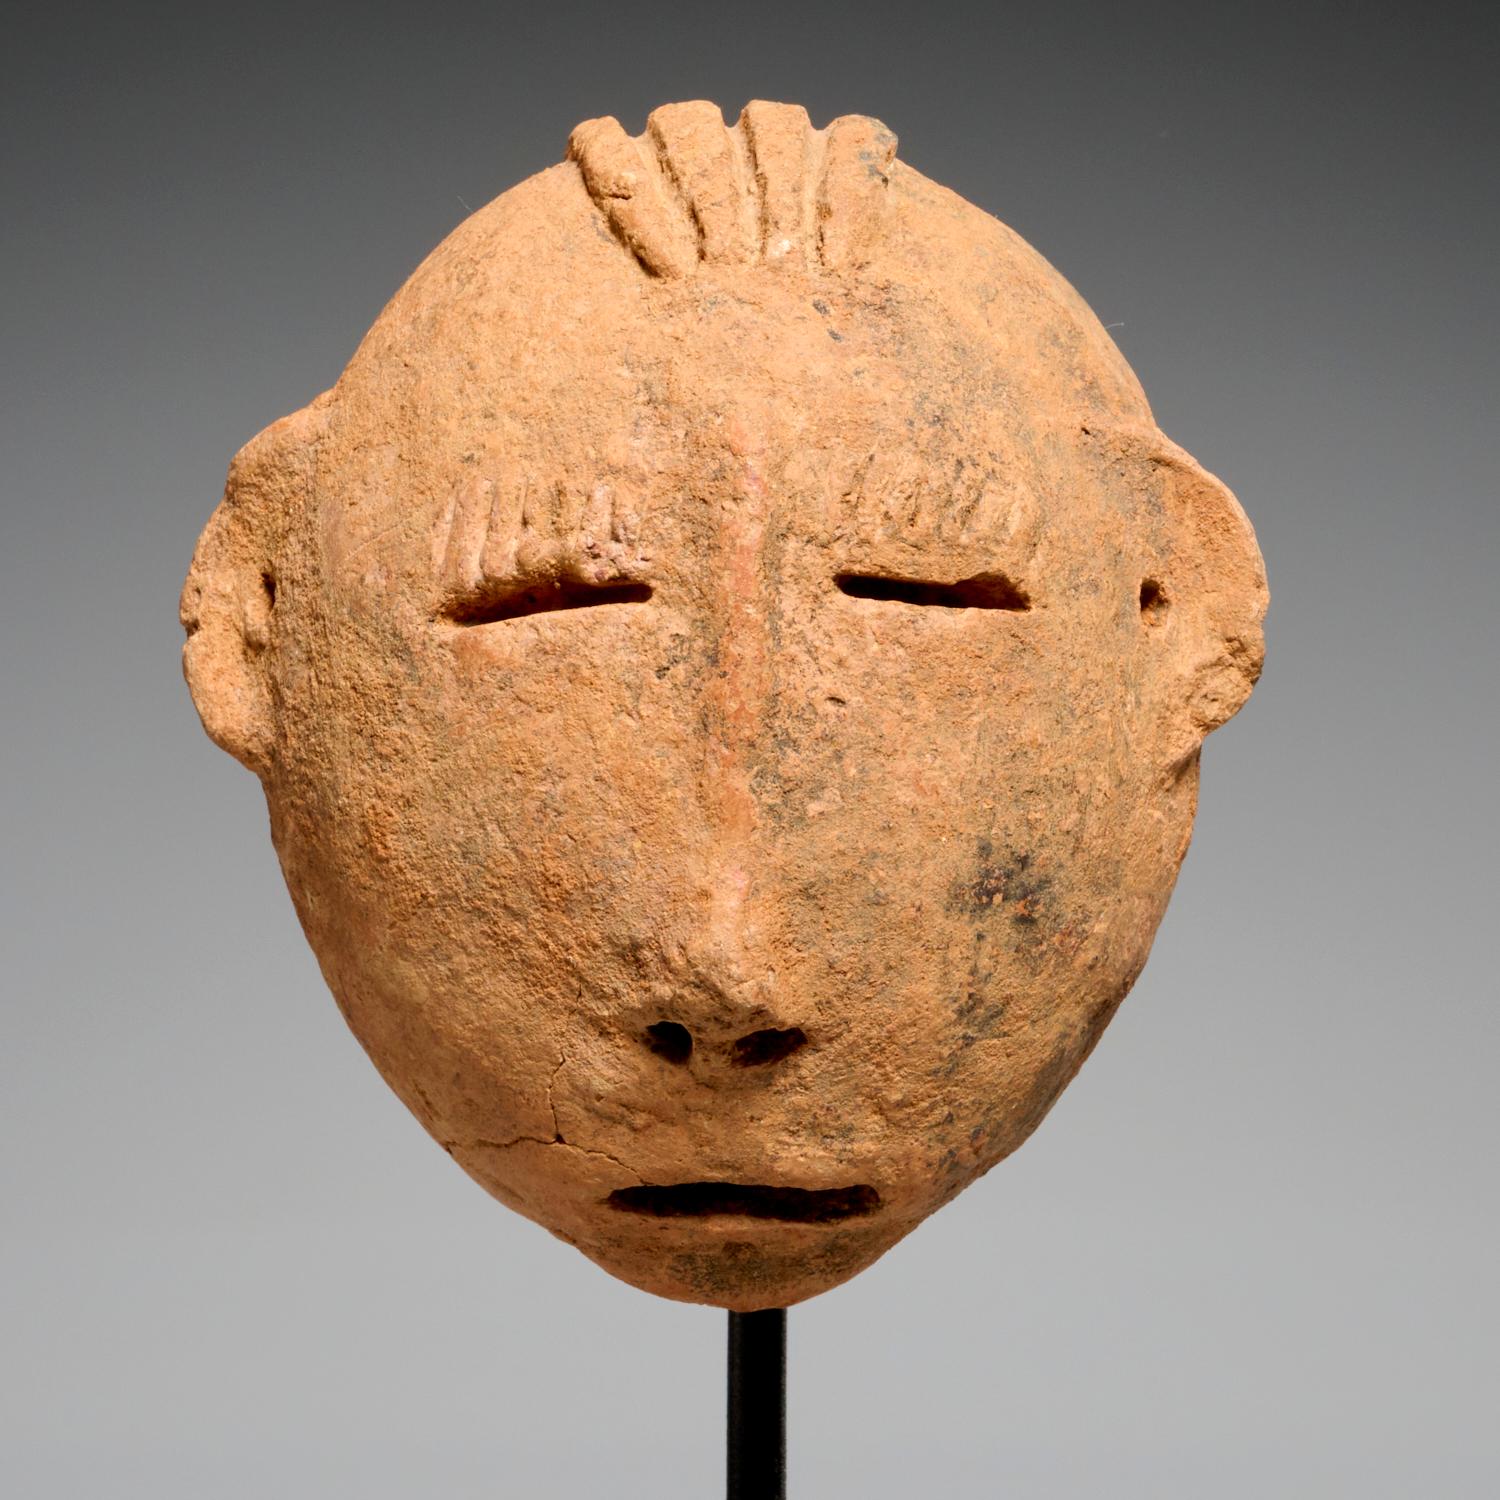 Bura fired clay heads, possibly 3rd-10th c. CE, Niger, Bura peoples. These are very expressive examples on custom mounts, the larger with manganese deposits.

Between the 3rd and 10th centuries, the dead were laid to rest at a site in present-day